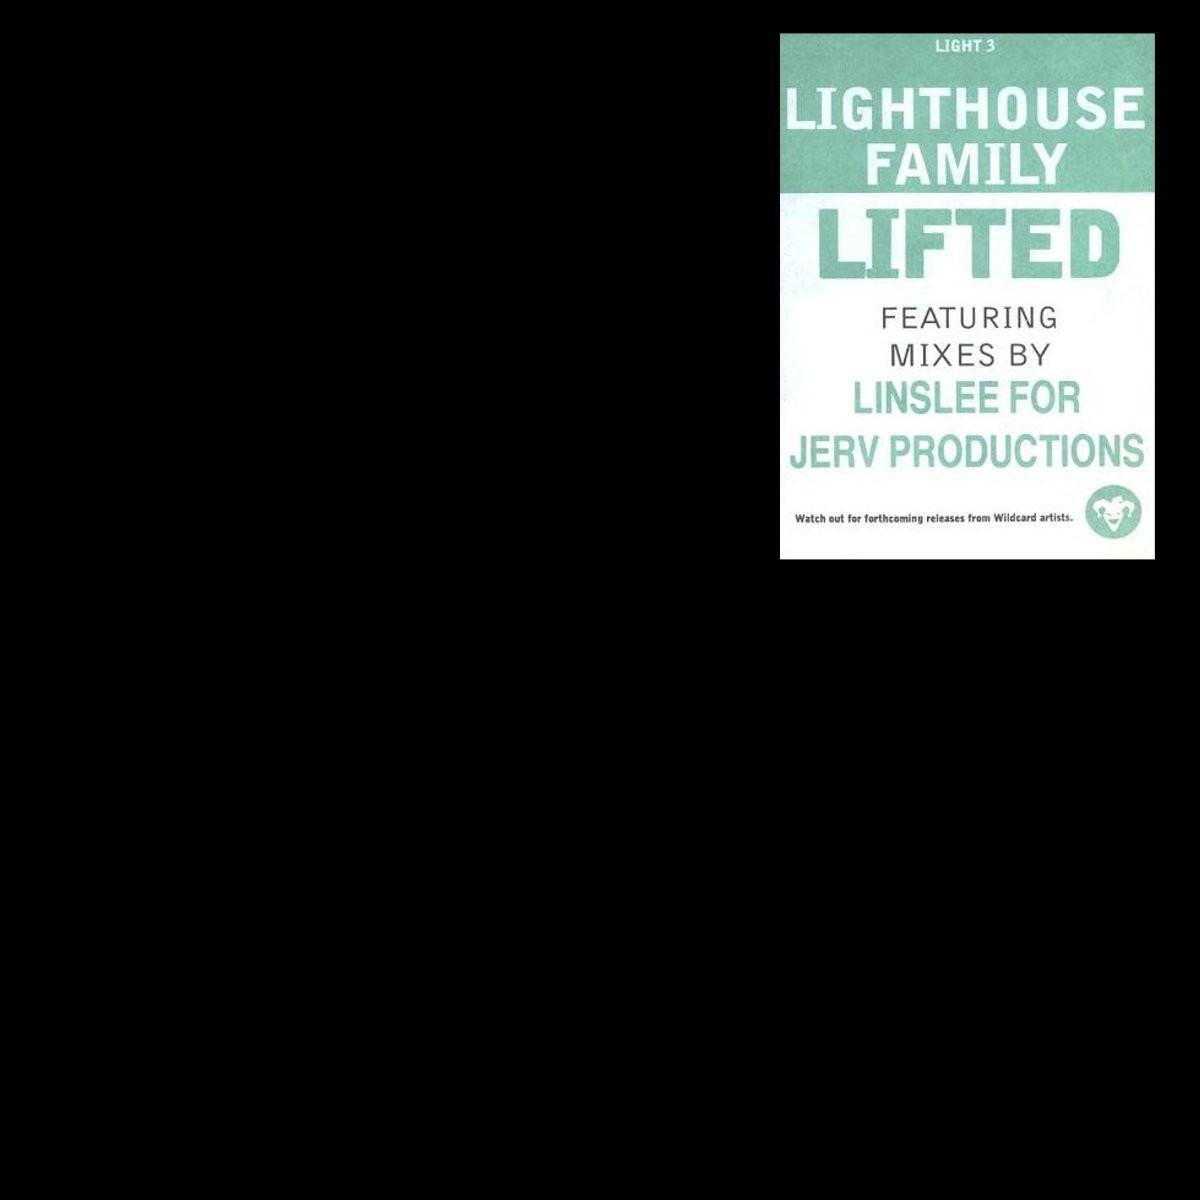 Lighthouse Family - Lifted (Master mix / Linslee Vocal Up / Linslee Instrumental / Drop Mix Two / Drop Mix Three) Promo